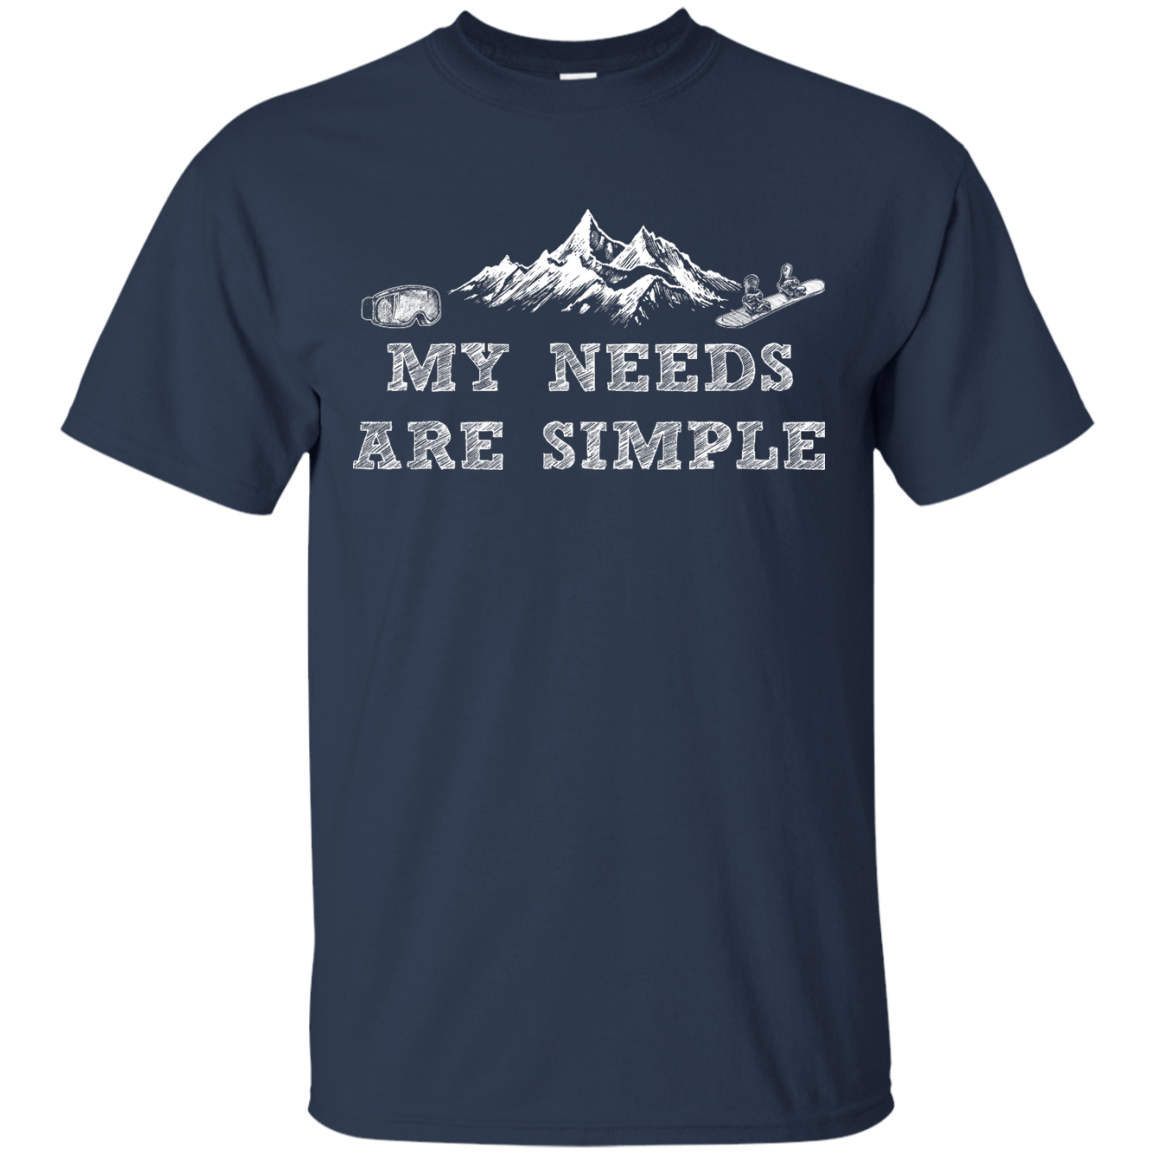 My Needs Are Simple - Snowboard Men's Tees and V-Neck - Powderaddicts